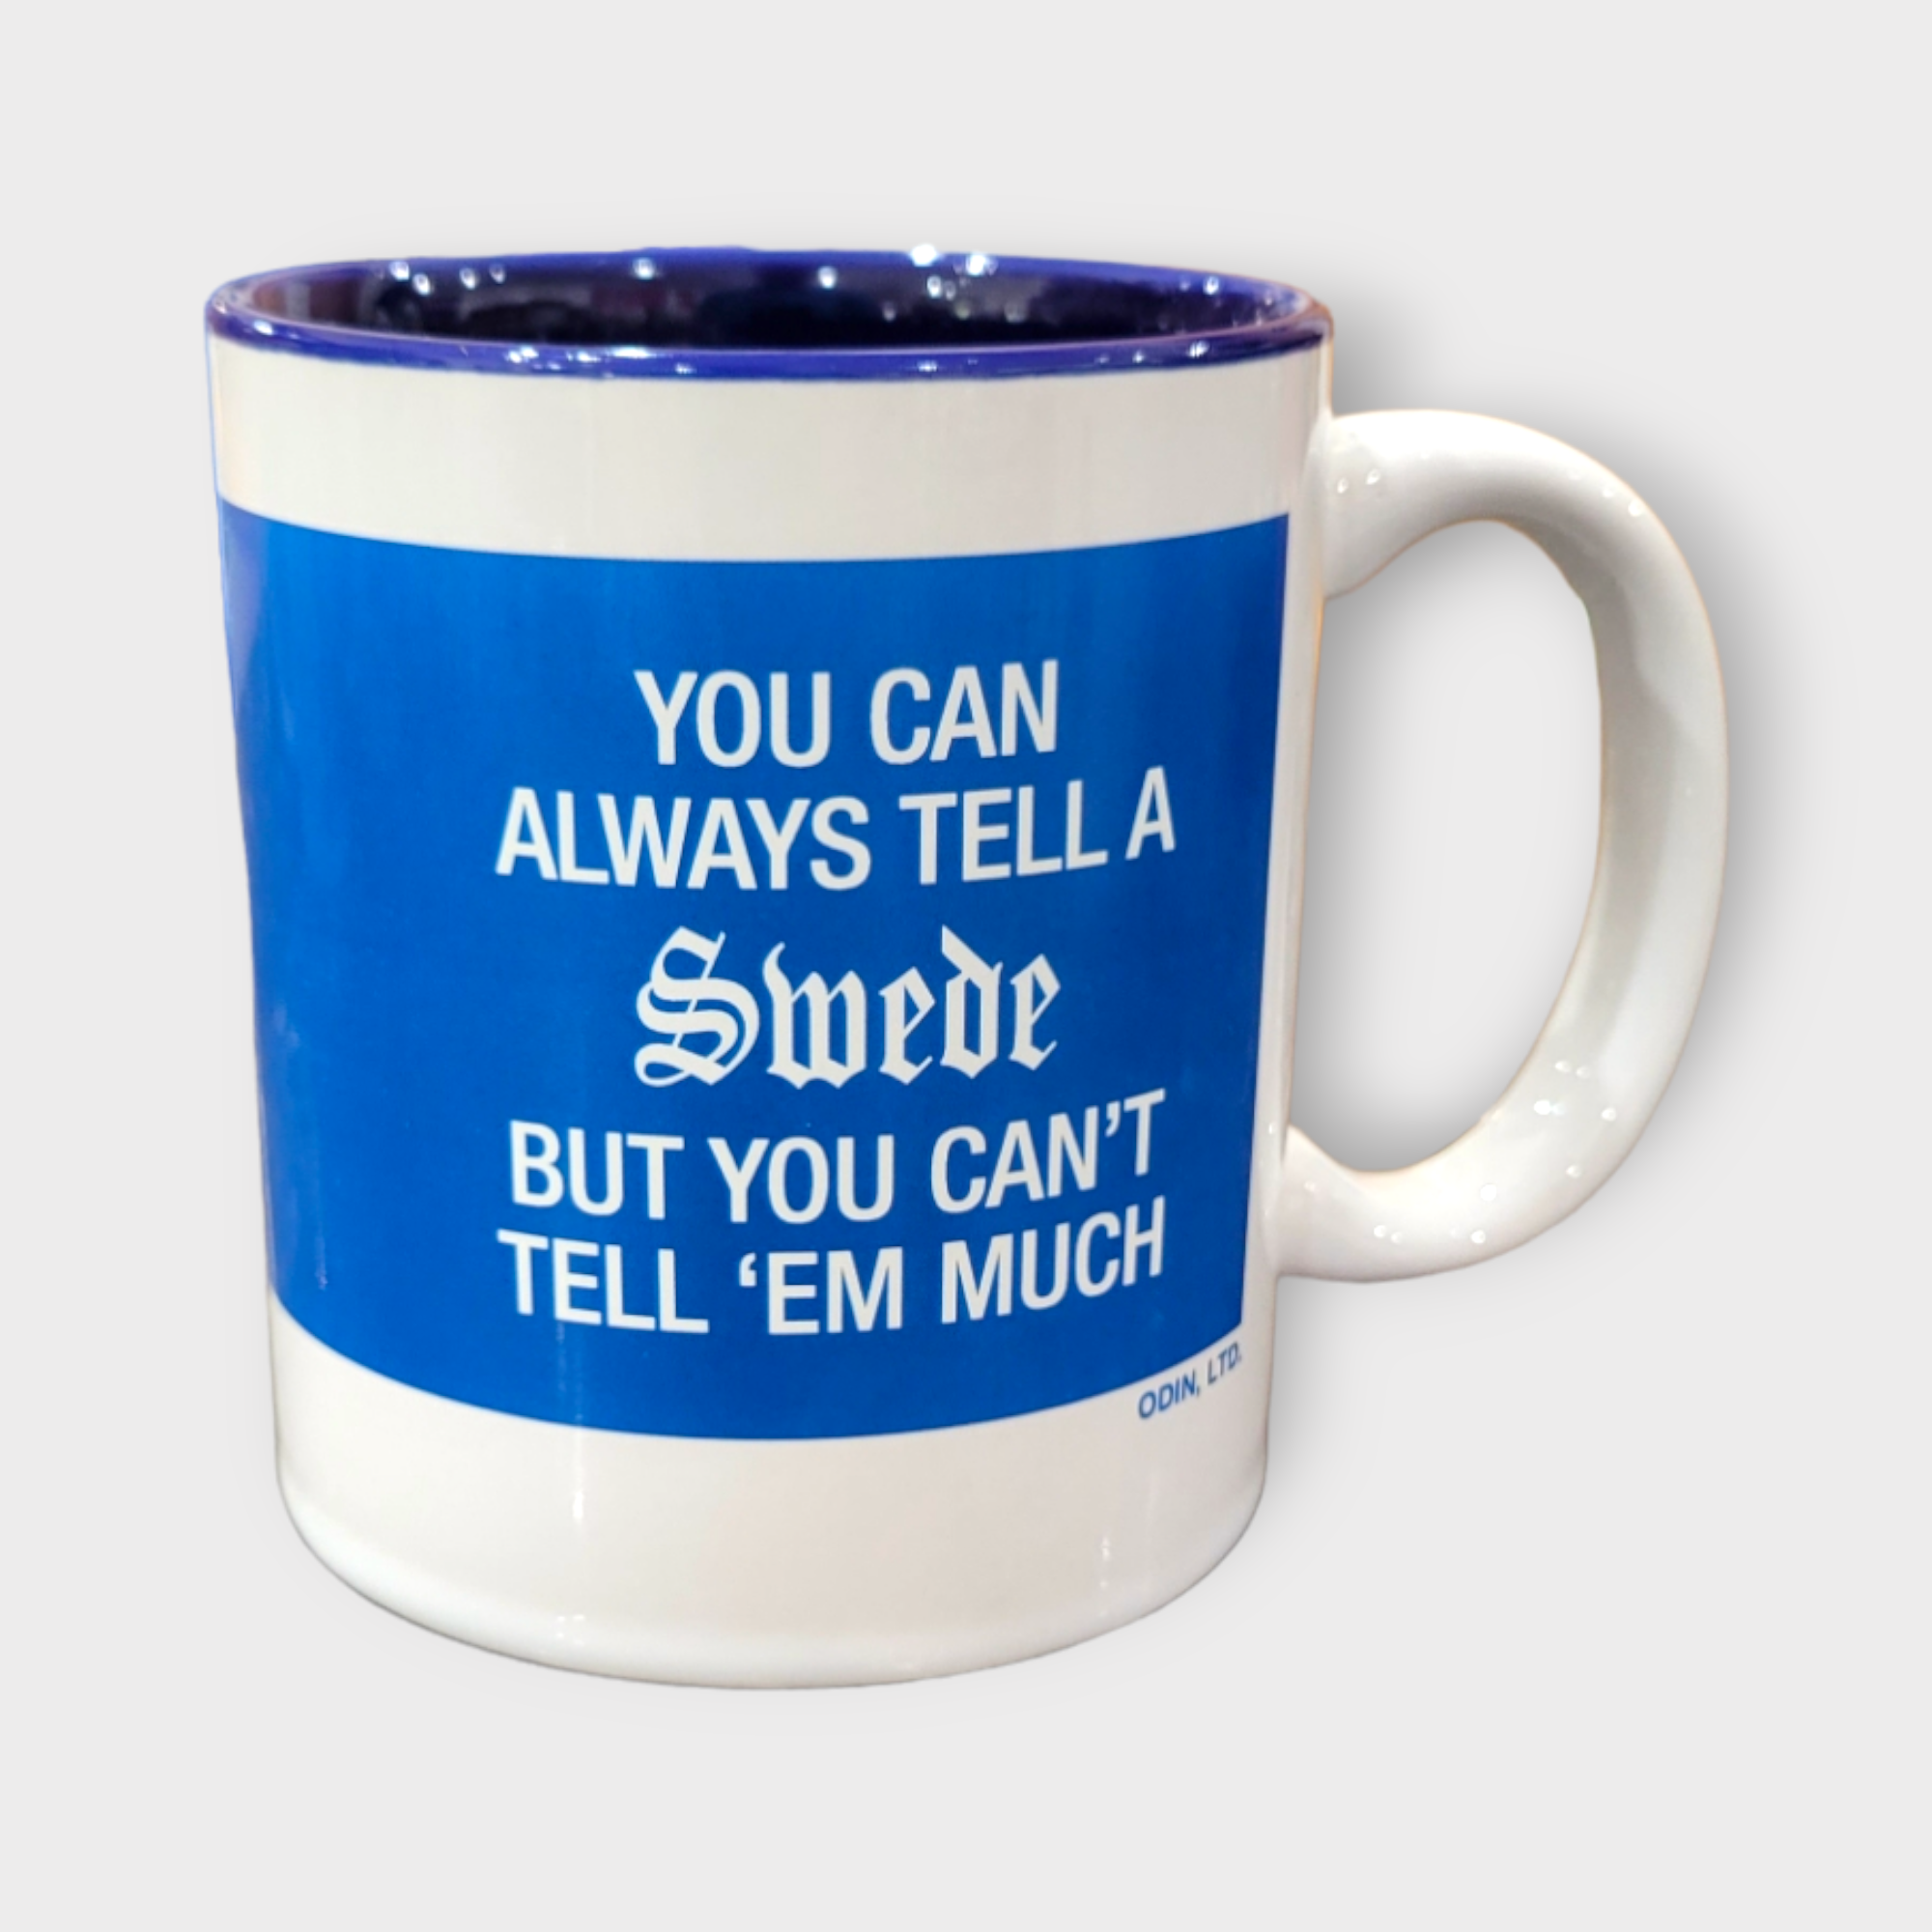 Mug: You Can Always Tell A Swede But You Can't Tell 'Em Much (11oz)